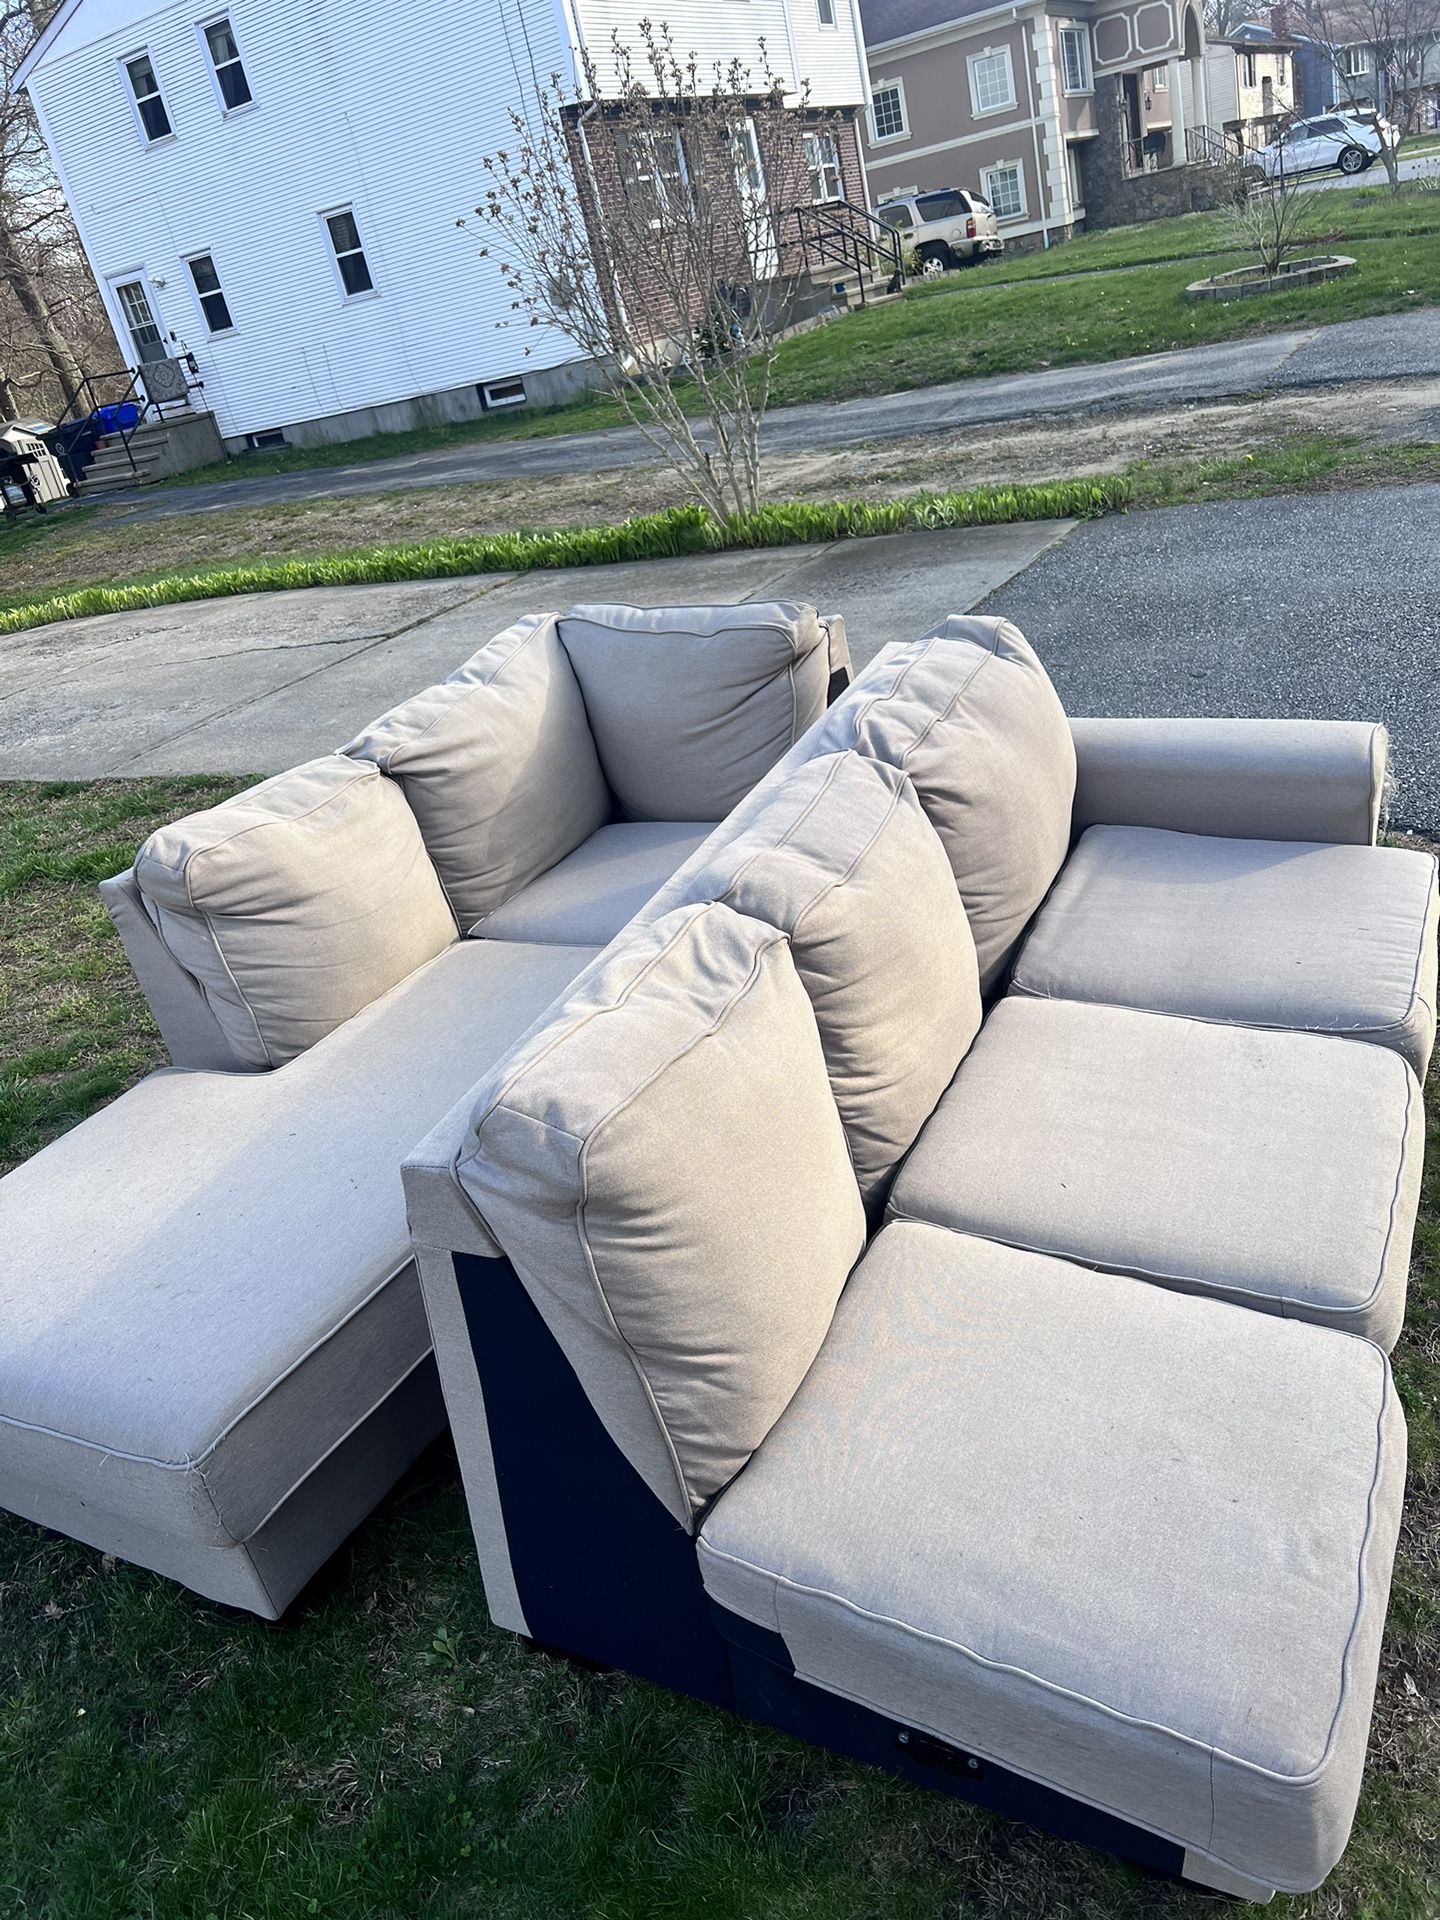 FREE SECTIONAL COUCH/SOFA On The Curb 